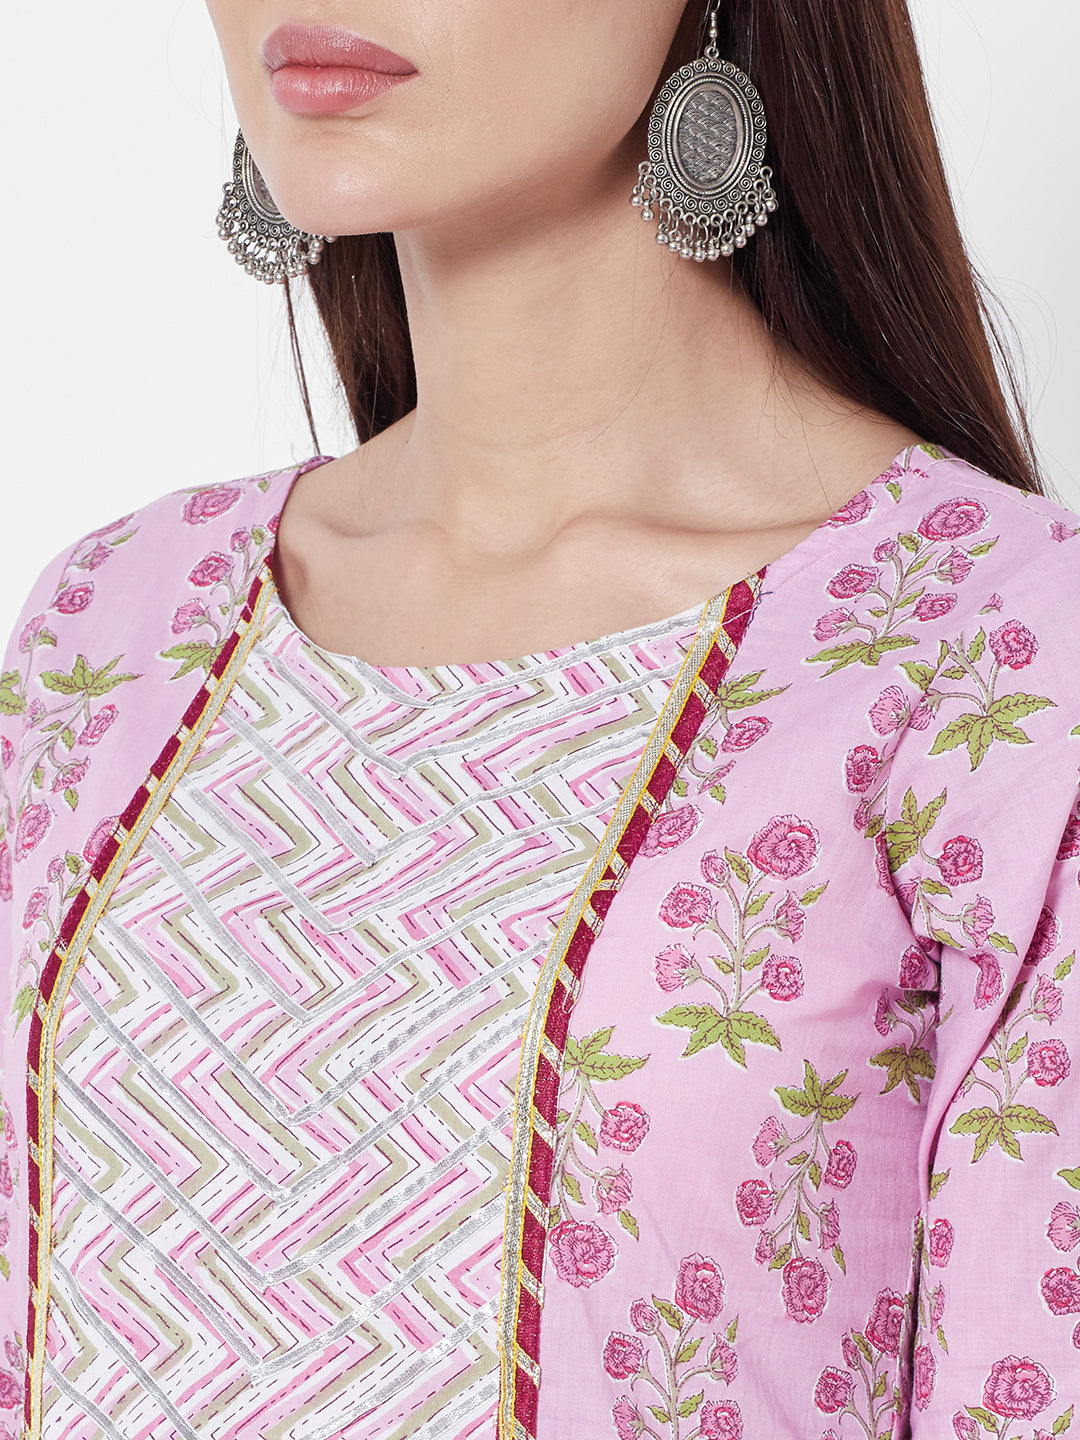 Vedic Women Pink Floral Printed Liva Kurta with Trousers  With Dupatta